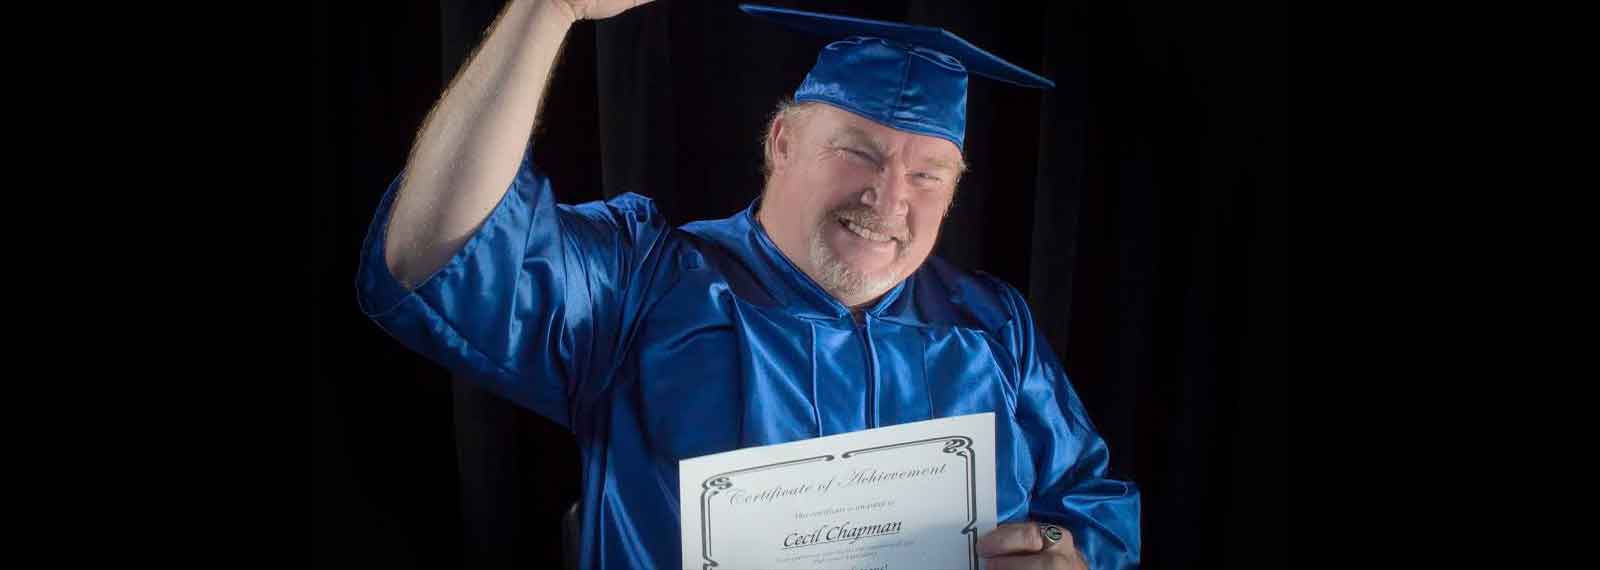 Photo of Cecil Chapman graduating with a diploma.